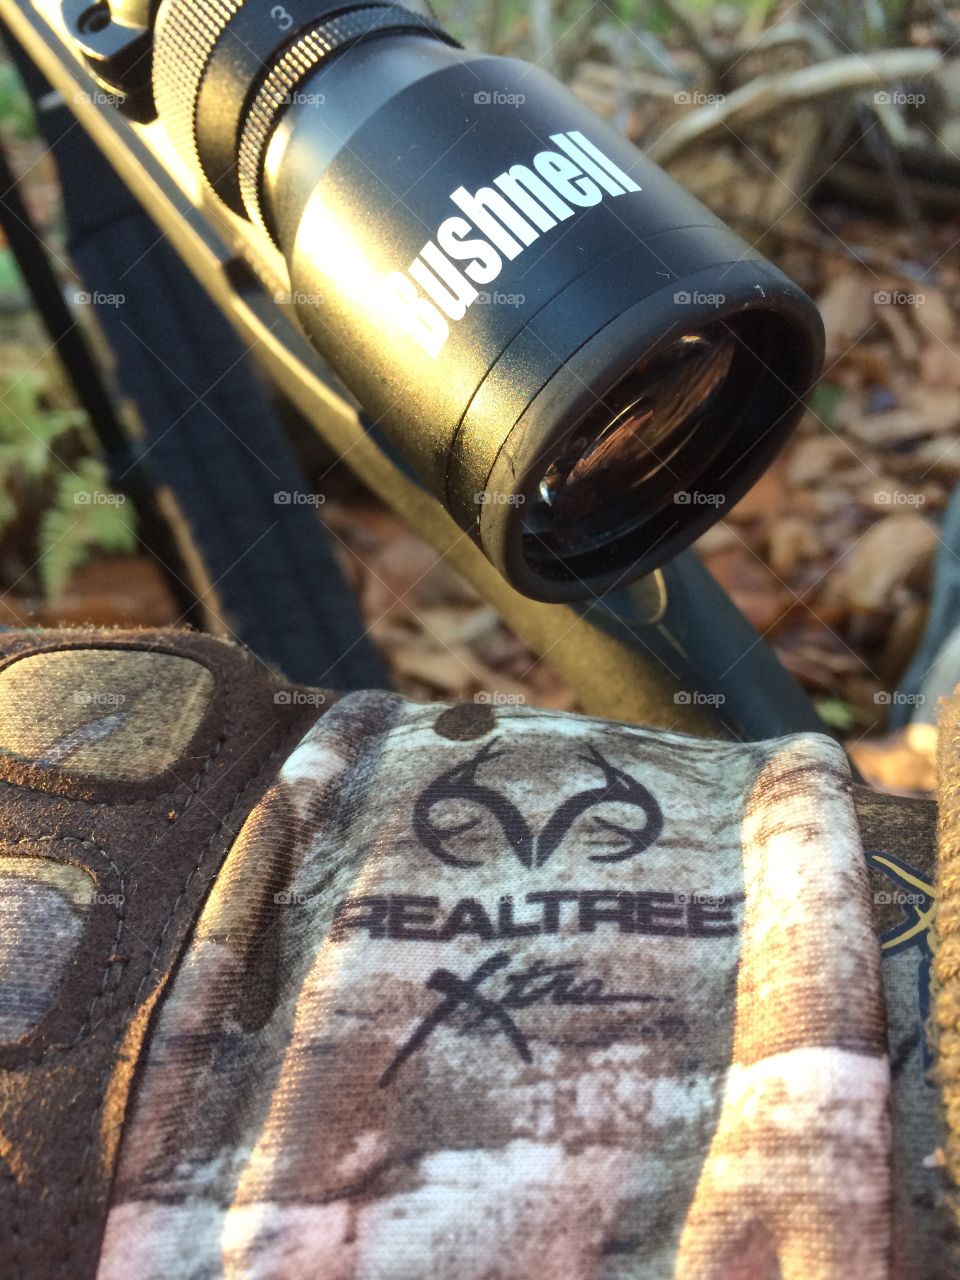 Bushnell Scope and Realtree equipment 